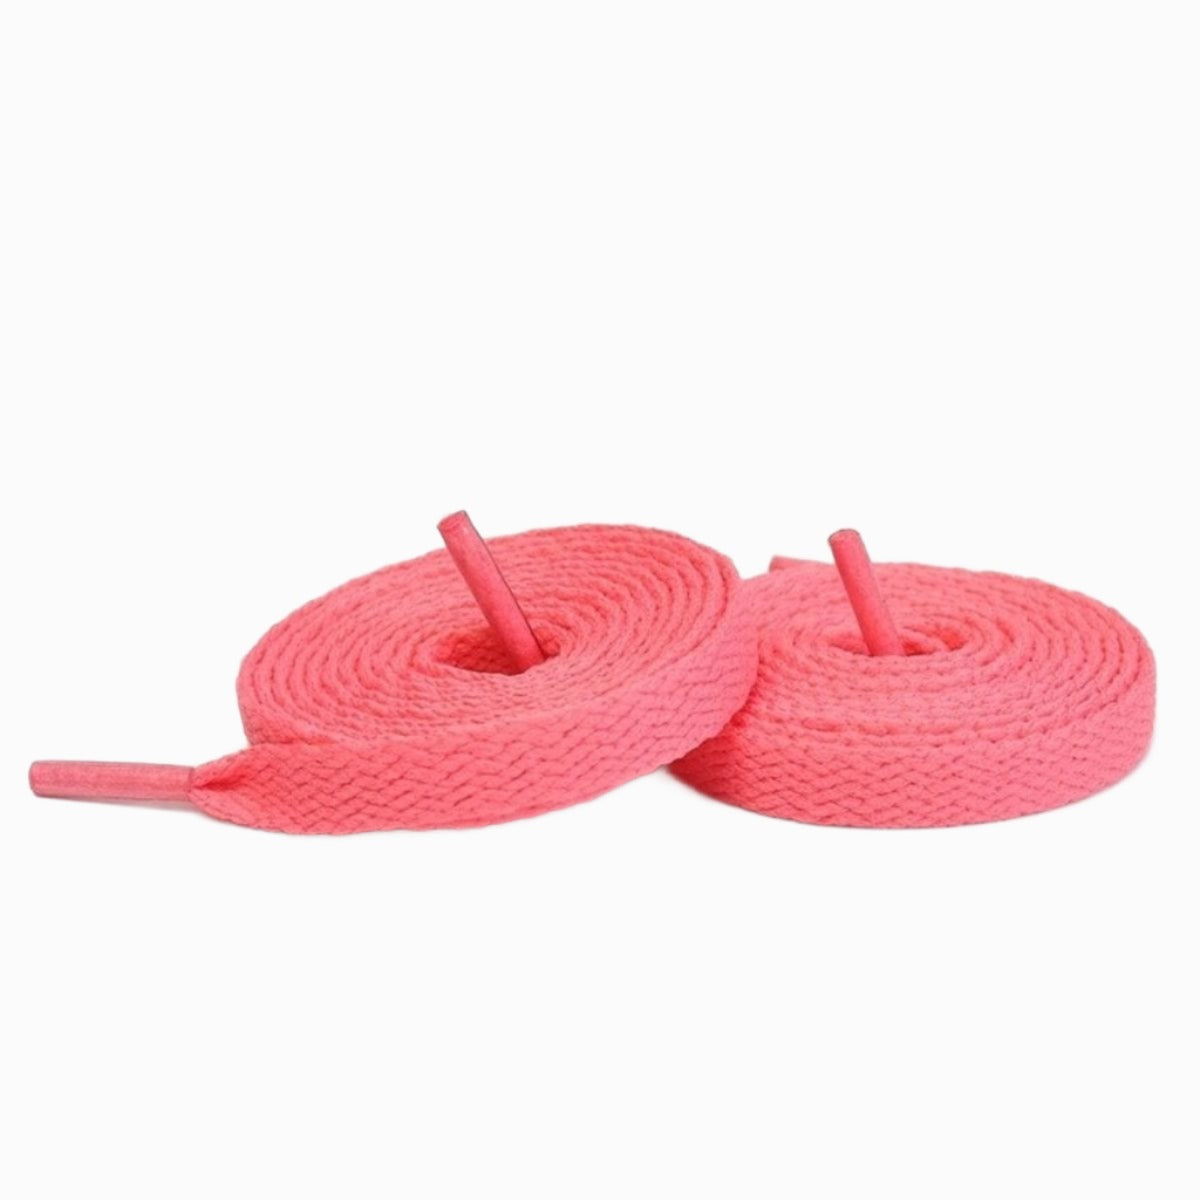 watermelon-red-fun-shoelaces-suitable-for-tying shoelaces-on-popular-sneakers